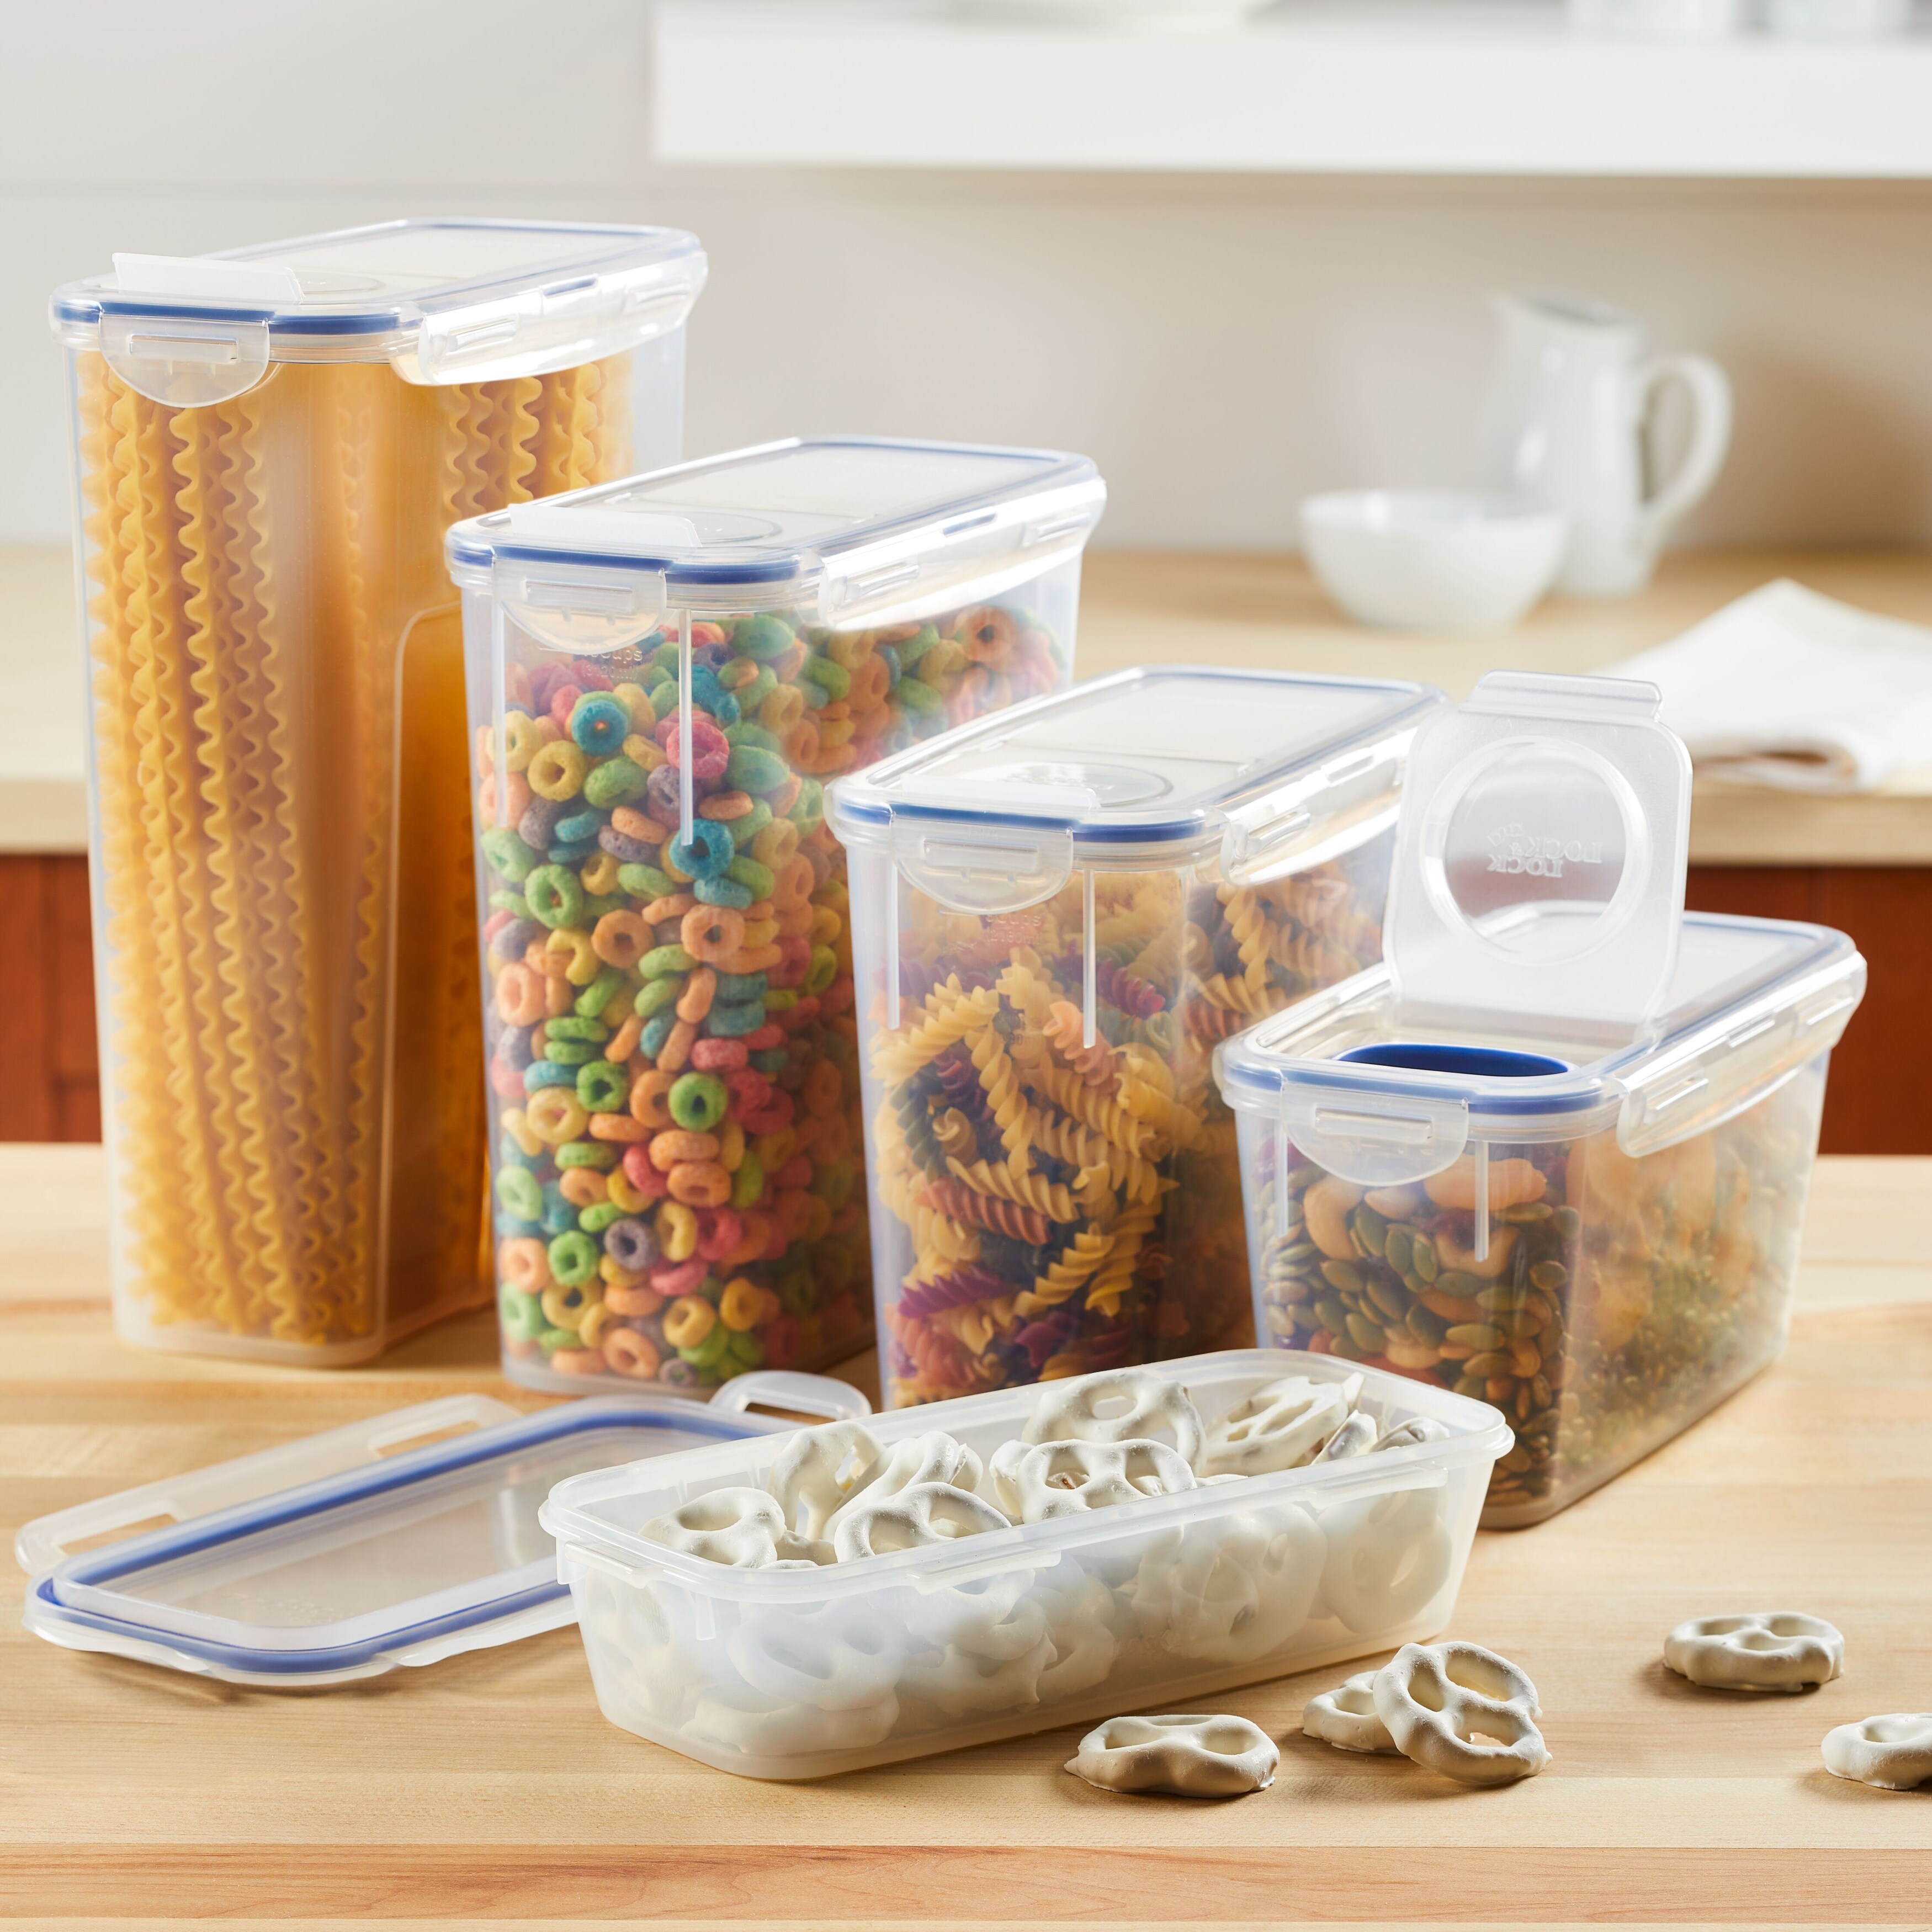 https://ak1.ostkcdn.com/images/products/is/images/direct/d0ce7340aefc00947d7c1931f42efbb397f1385f/LocknLock-Pantry-Food-Storage-Container-Set%2C-10-Piece.jpg